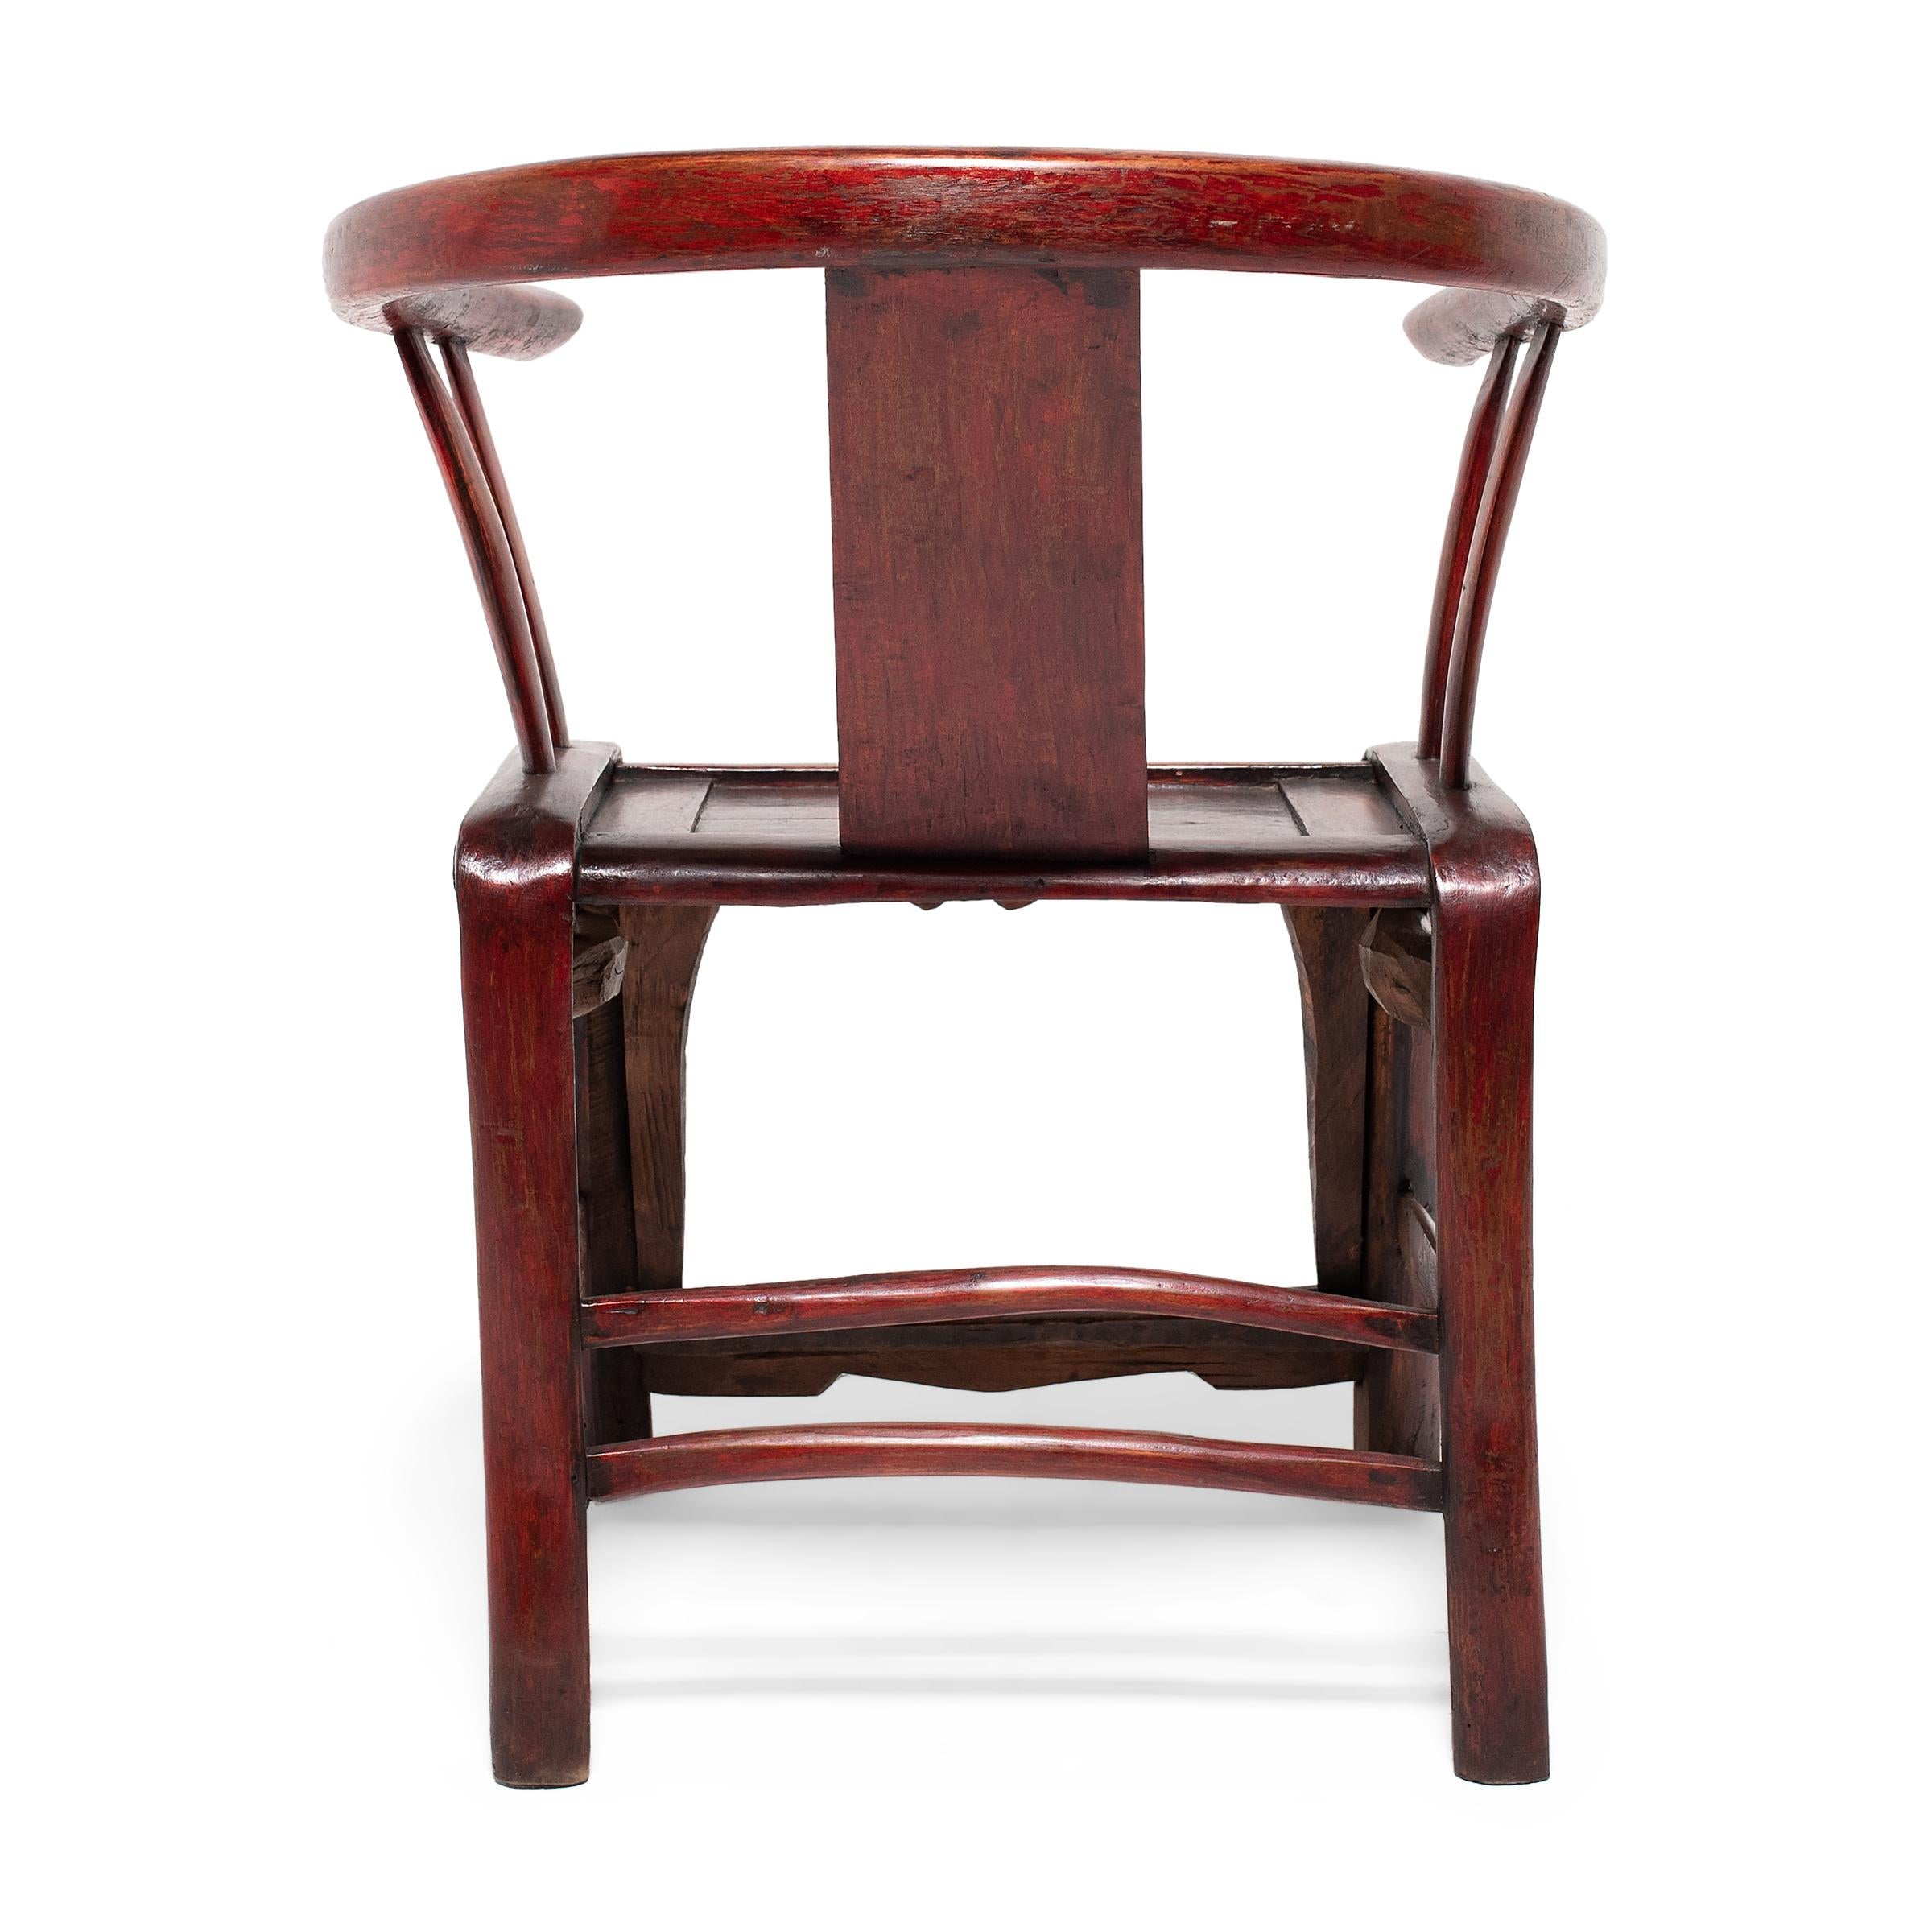 Carved Chinese Red Lacquer Roundback Chair, c. 1850 For Sale